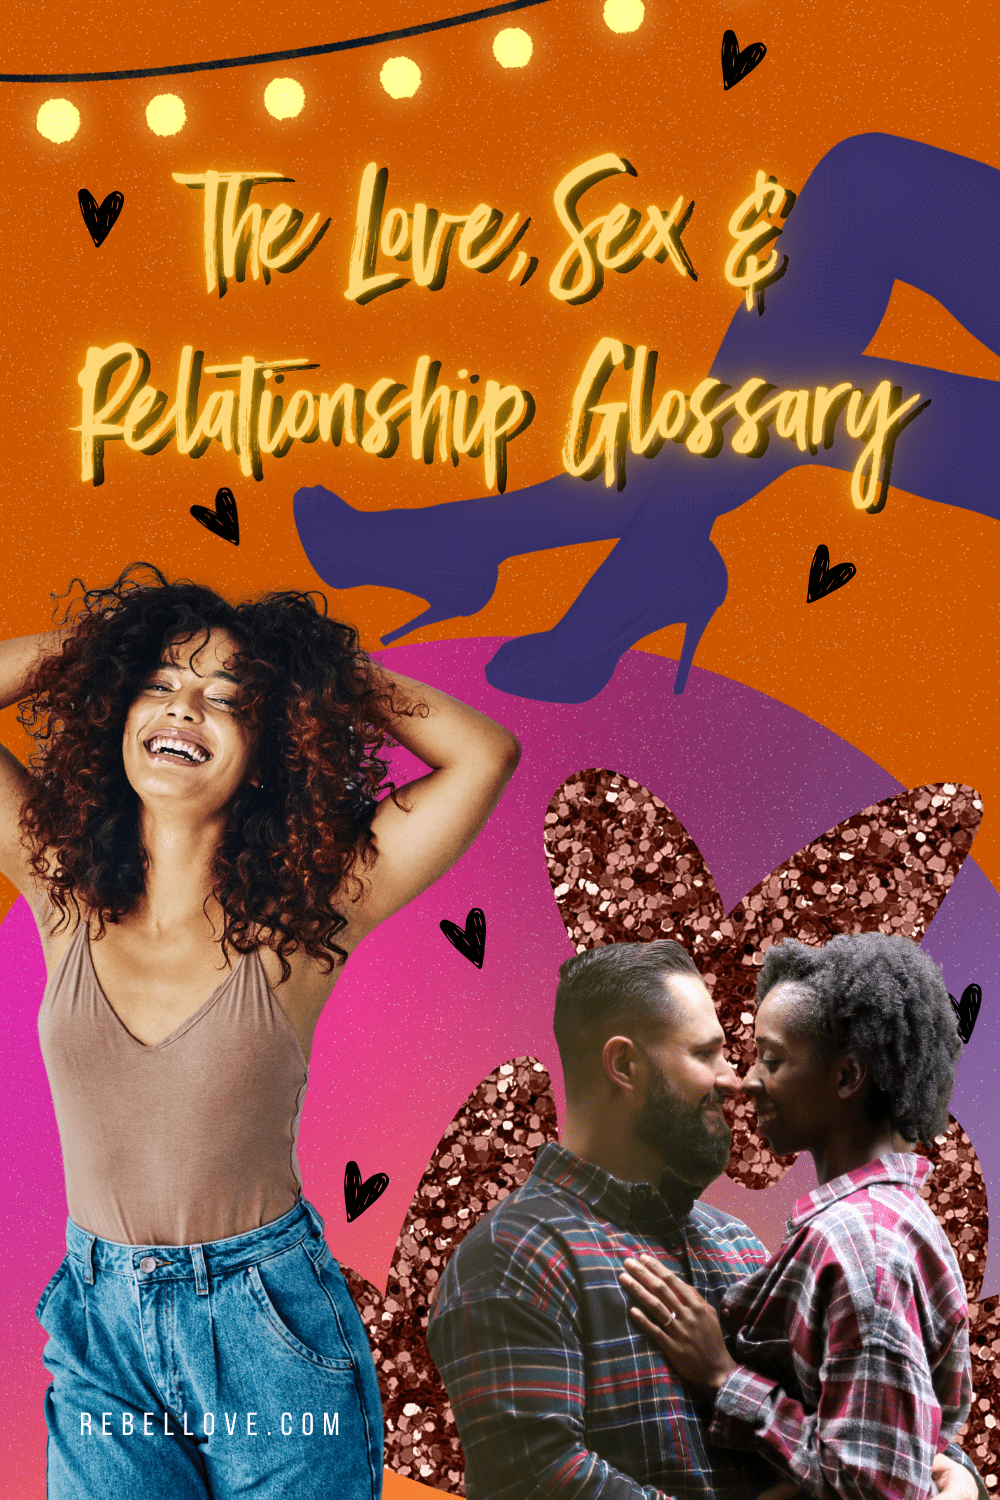 The Love, Sex, and Relationship Glossary image